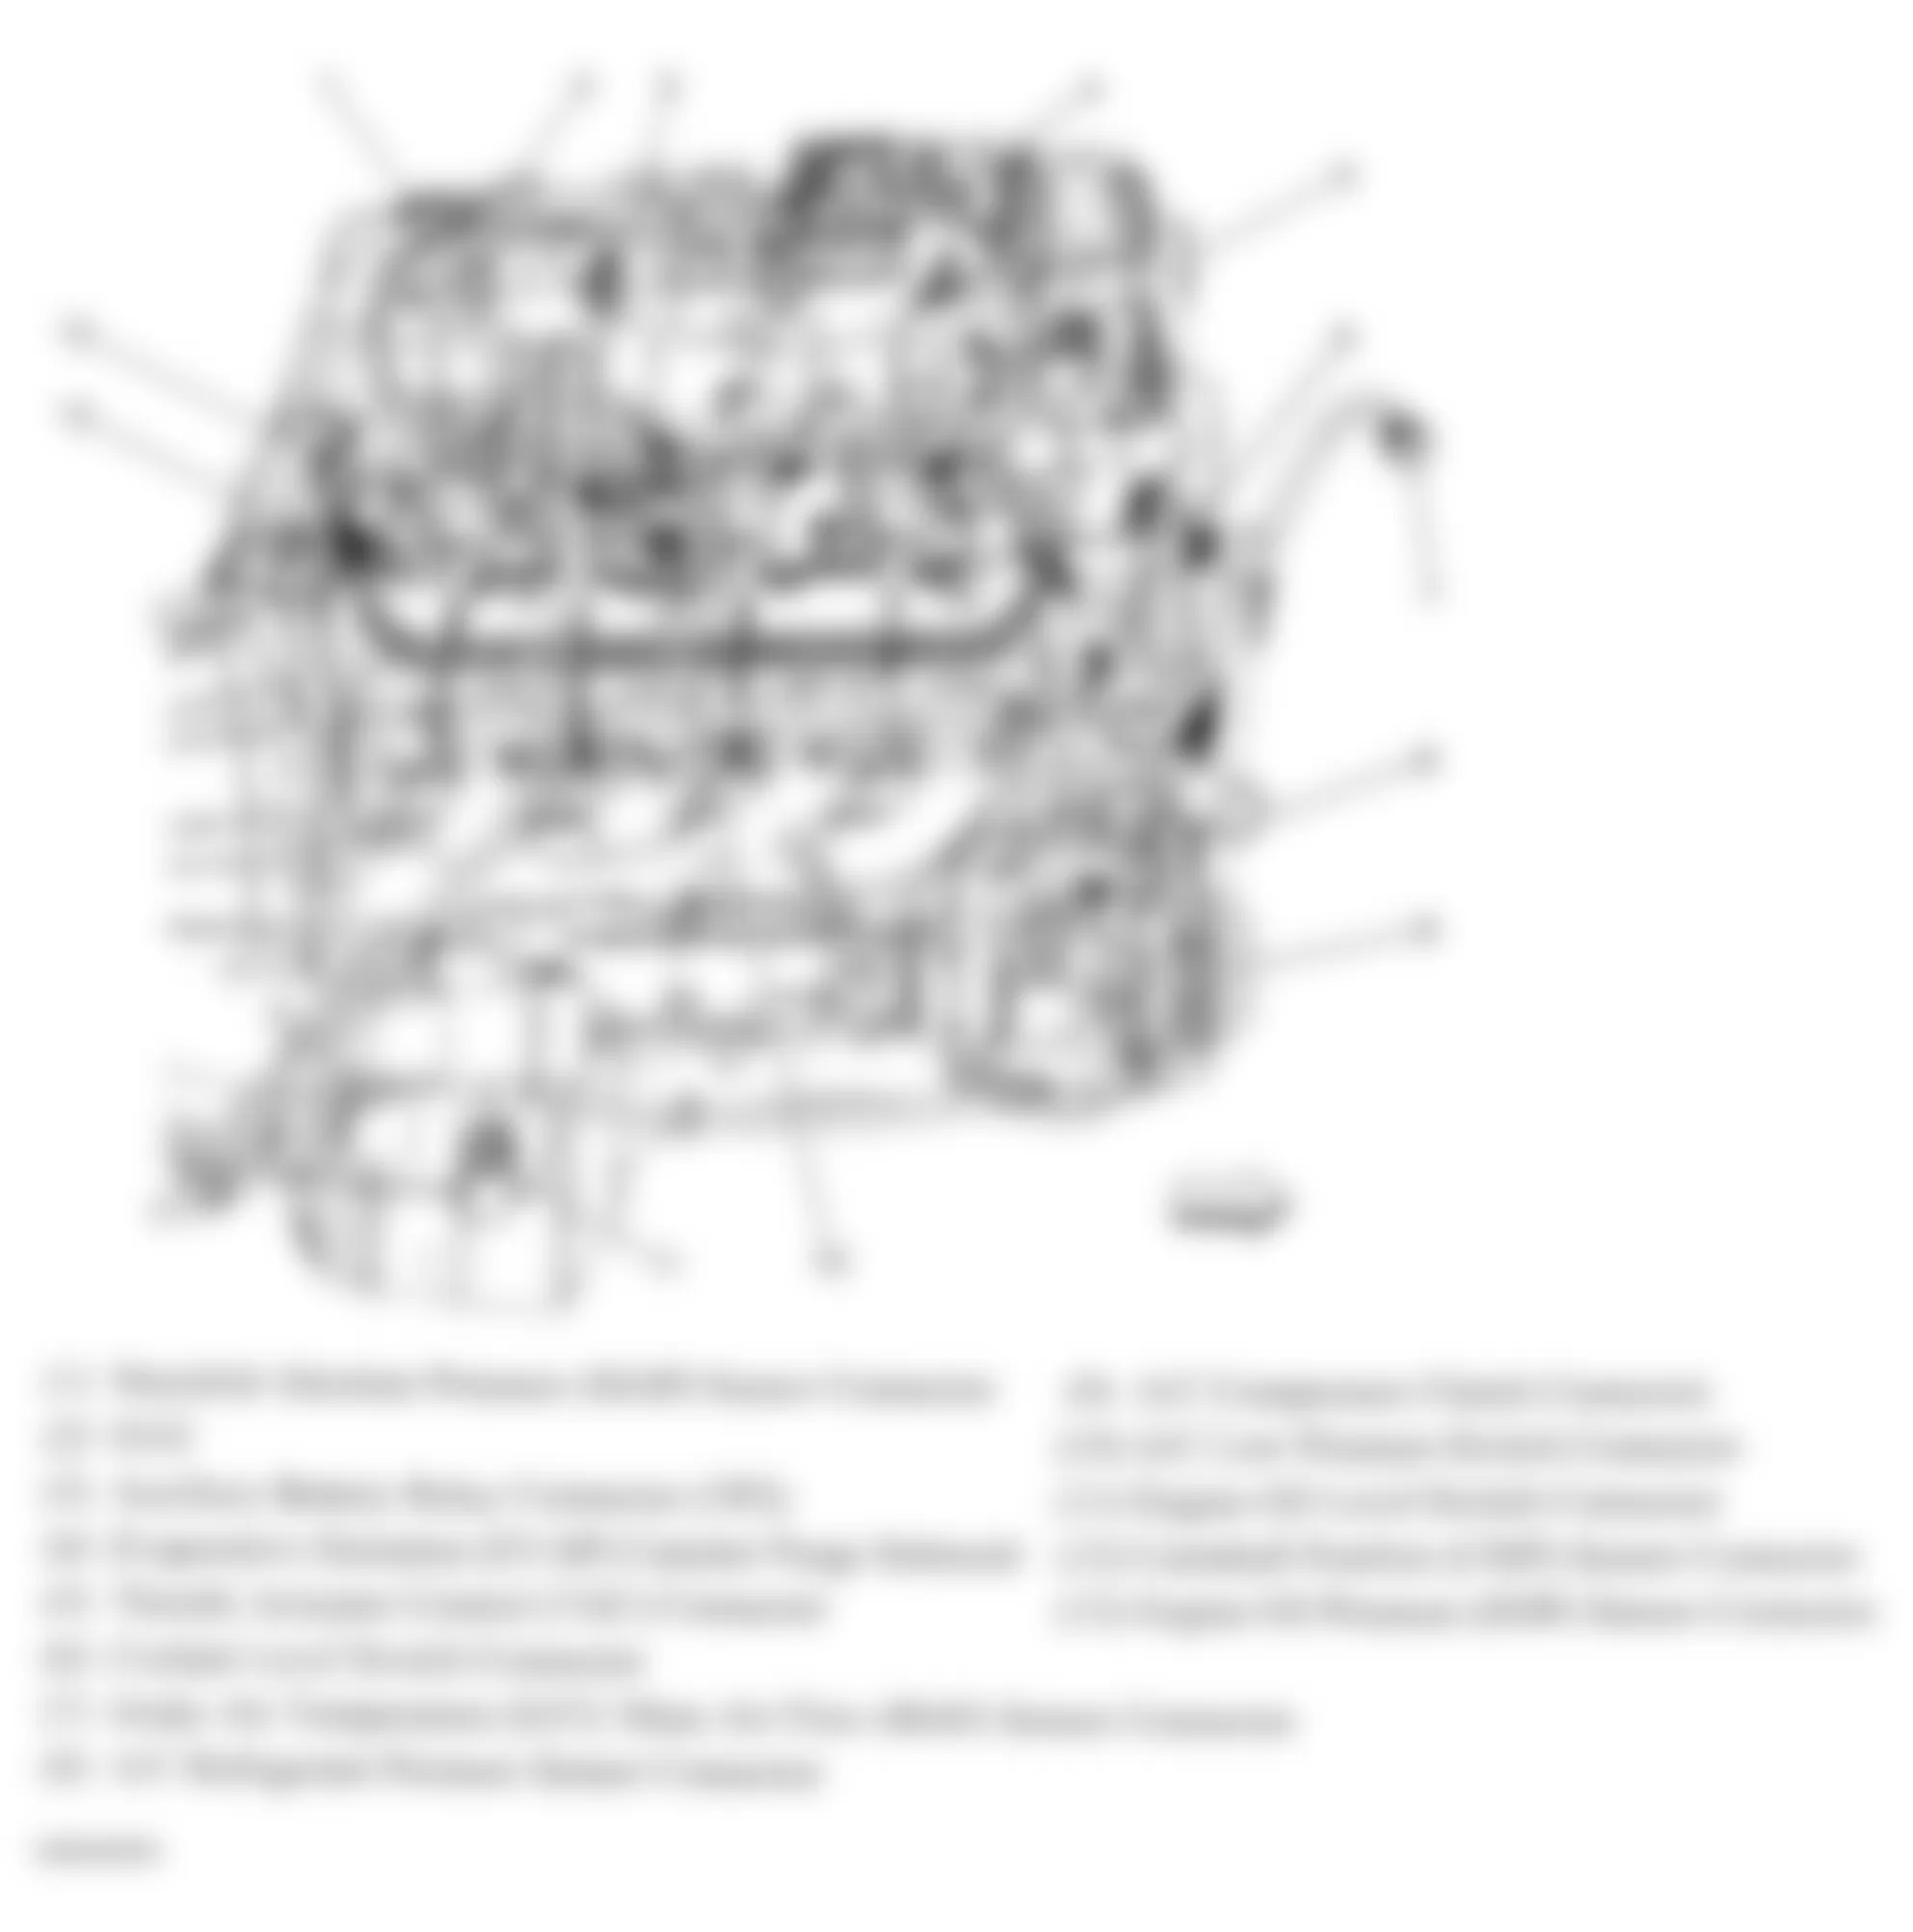 GMC Sierra Classic 1500 2007 - Component Locations -  Right Side Of Engine (4.8L, 5.3L & 6.0L)